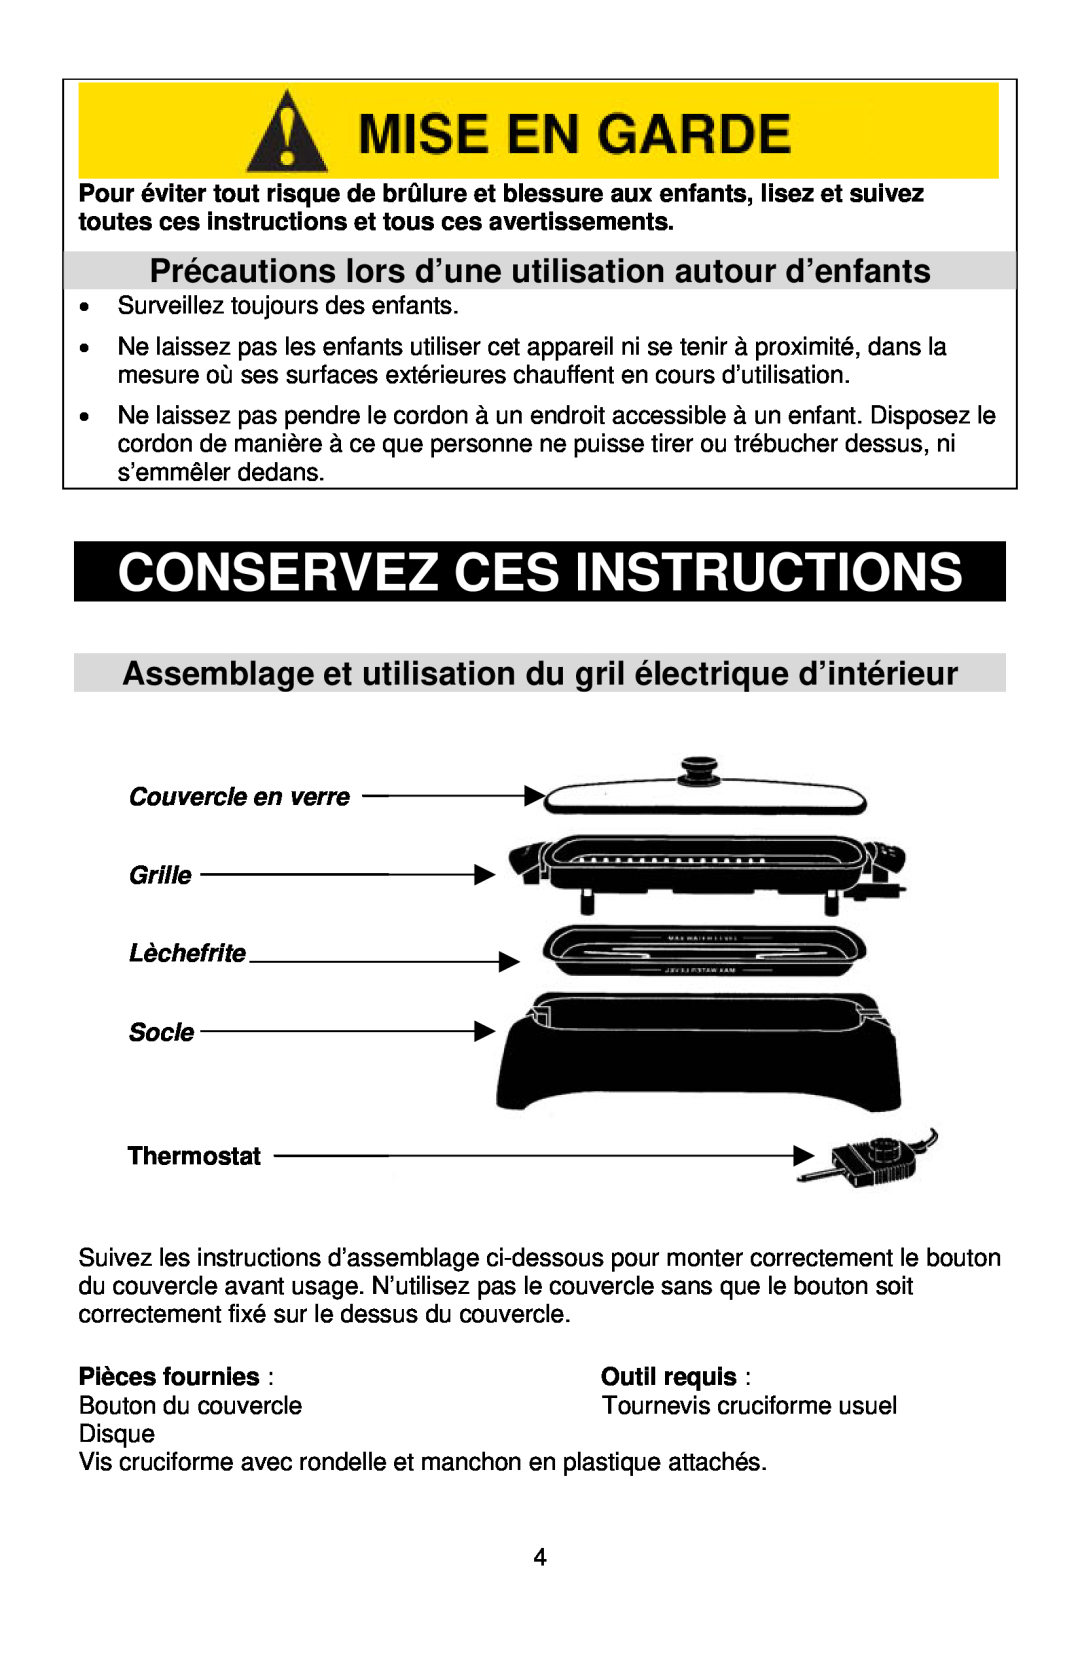 West Bend Electric Indoor Grill instruction manual Conservez Ces Instructions, Thermostat, Pièces fournies, Outil requis 